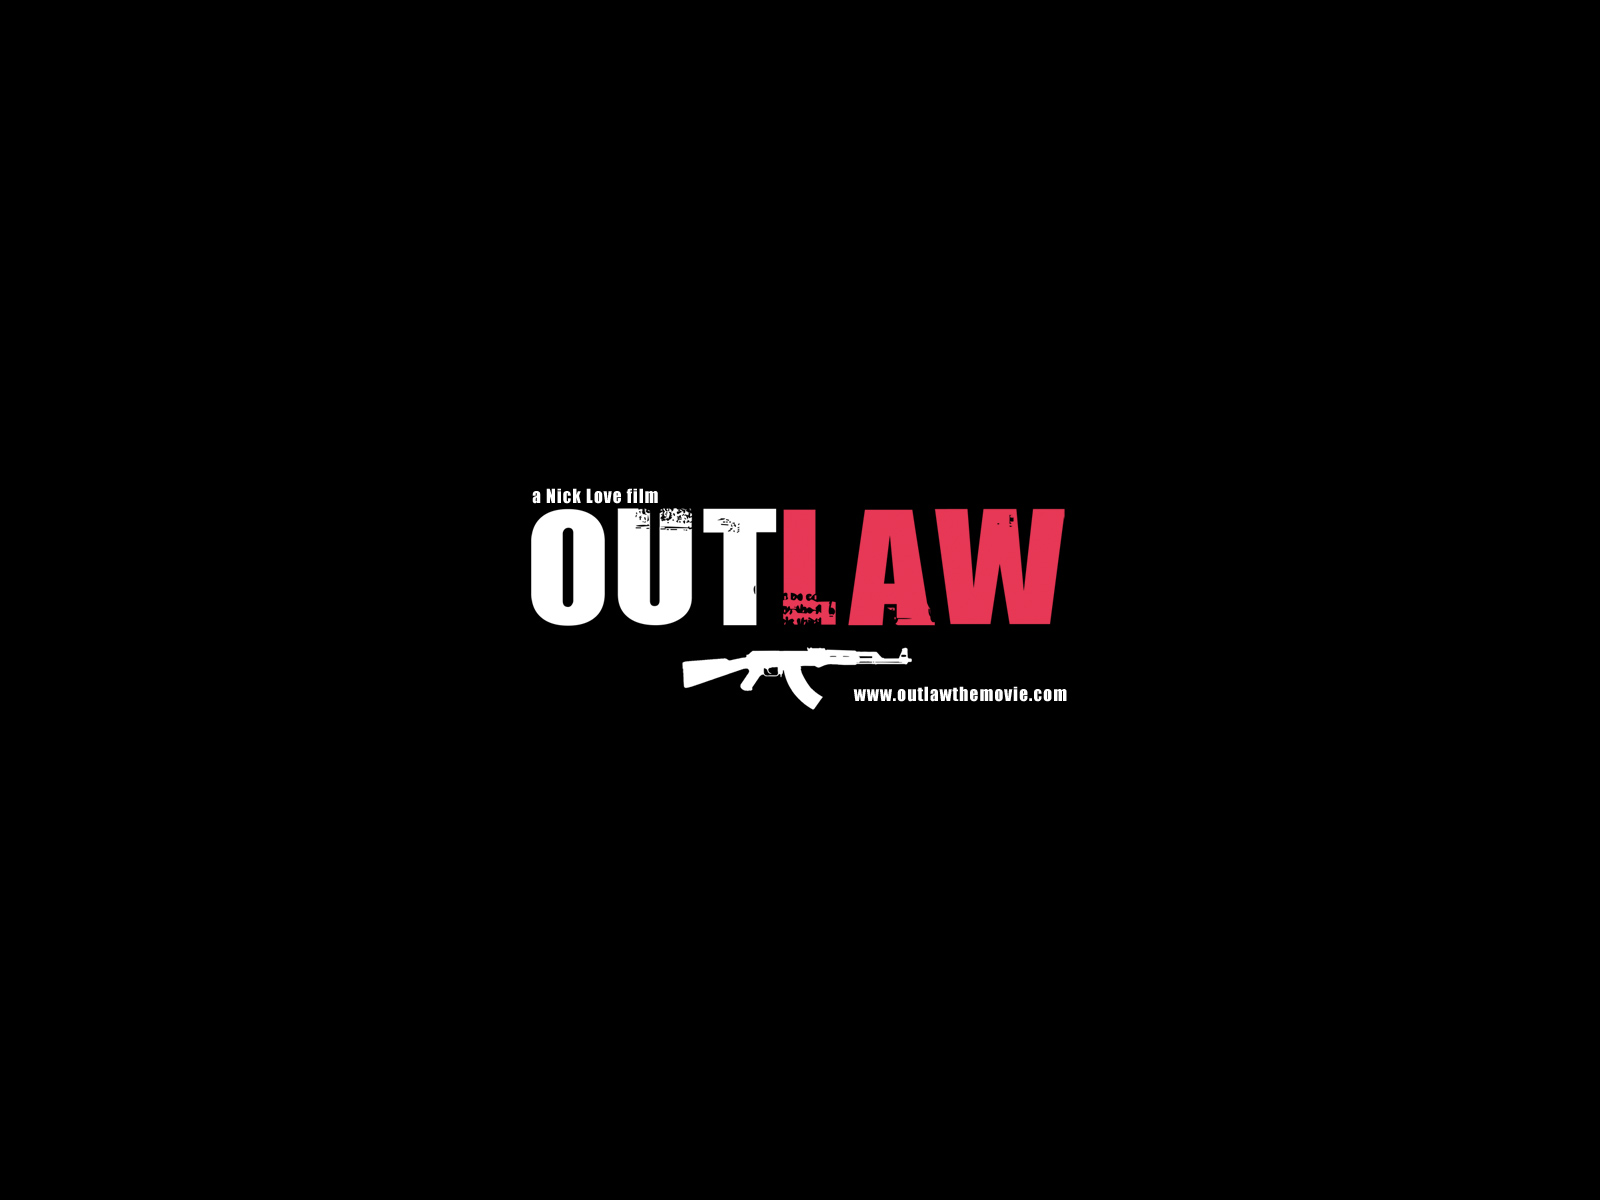 The Outlaw Wallpaper